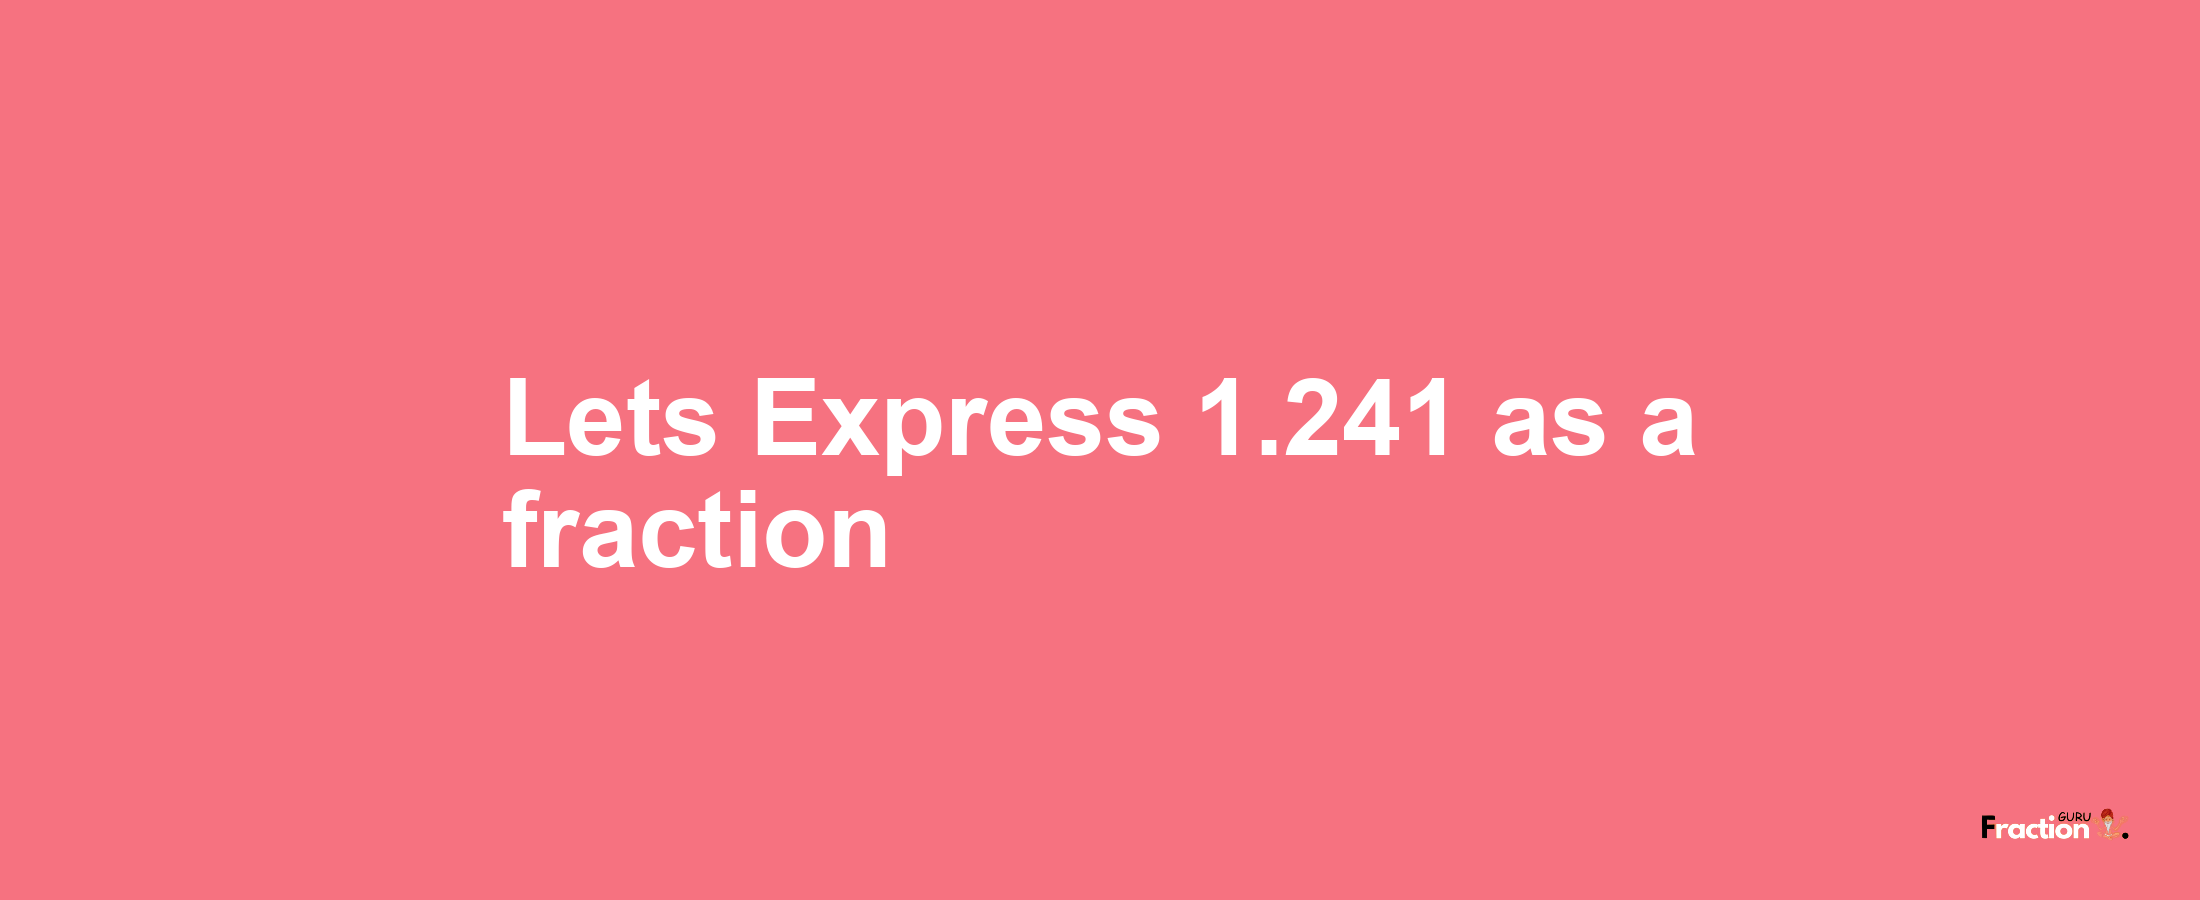 Lets Express 1.241 as afraction